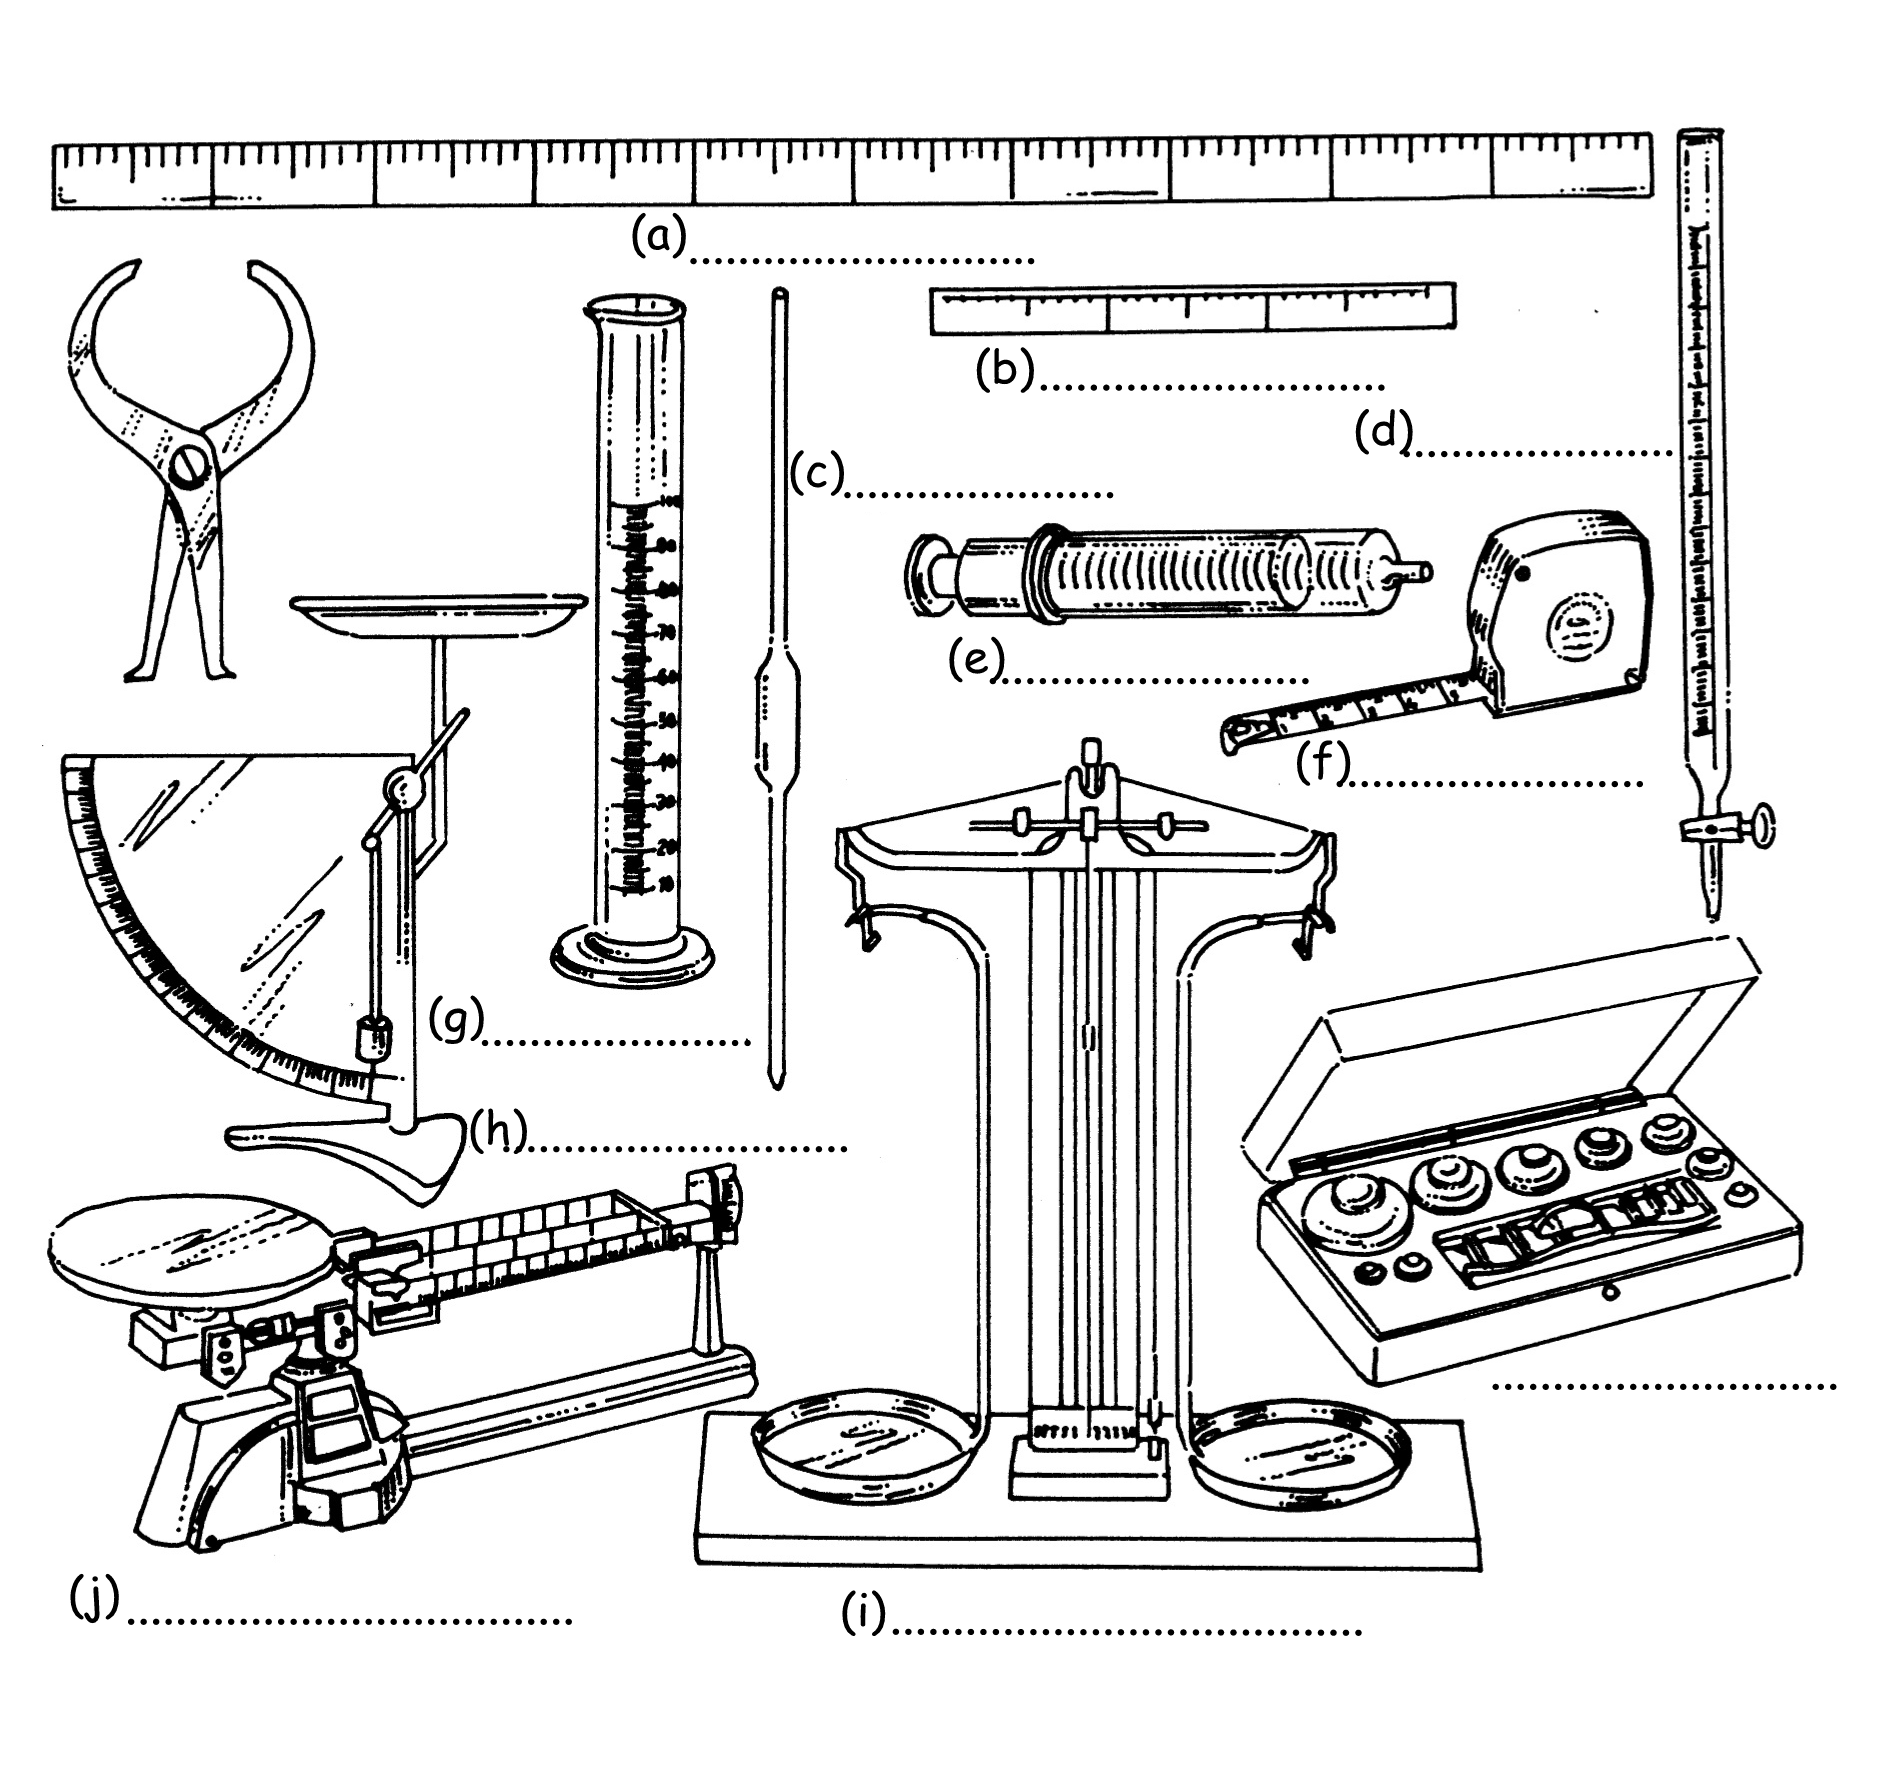 research the different measuring instruments